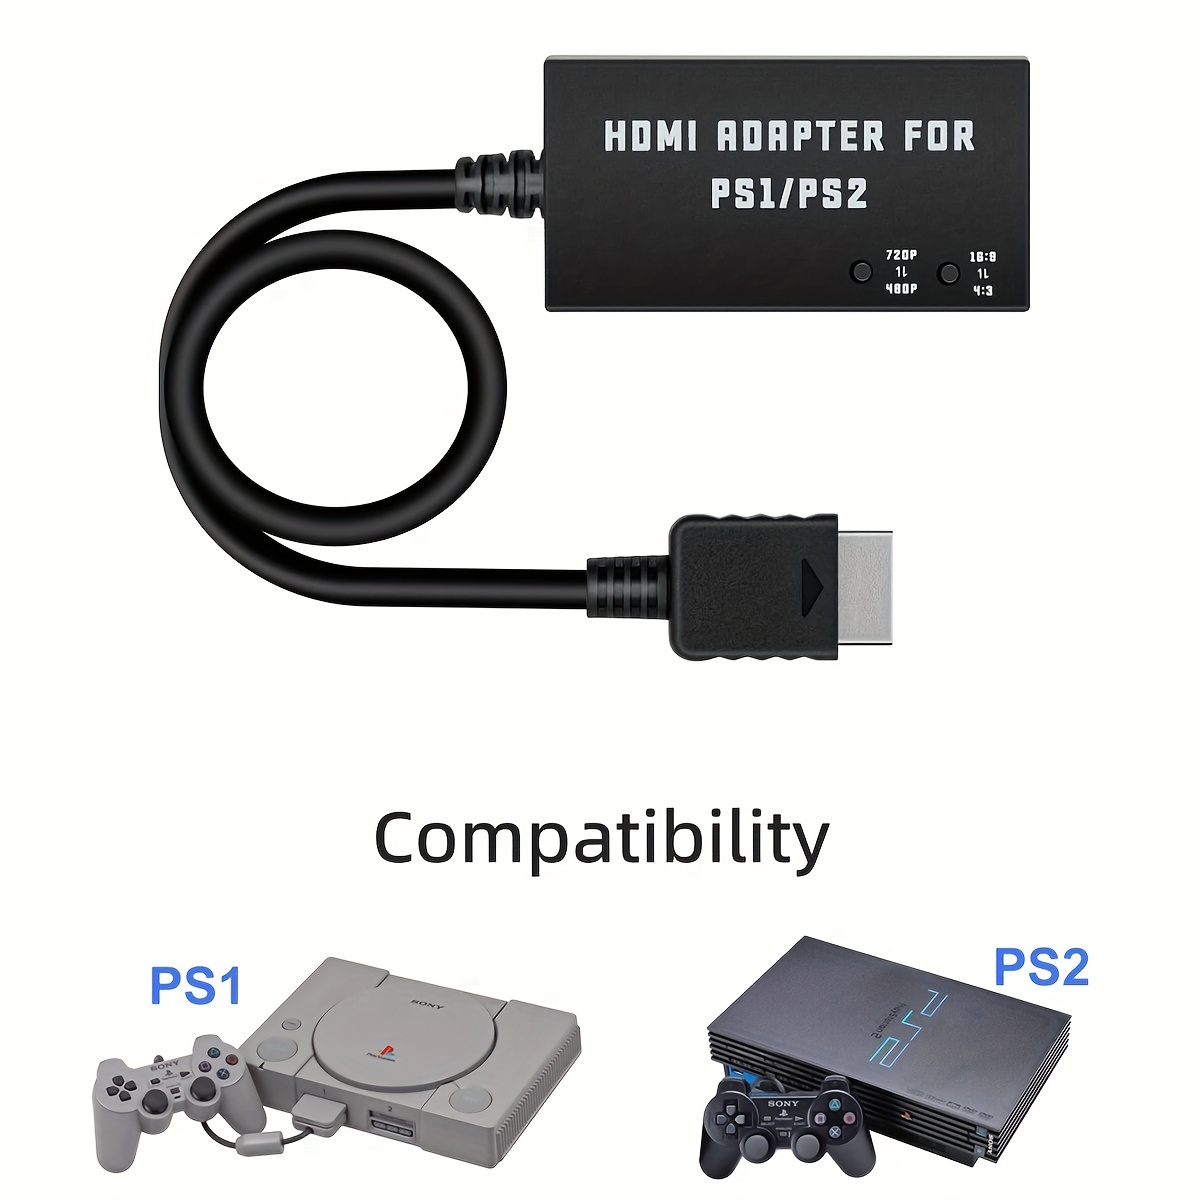  Y.D.F PS2 to HDMI Adapter PS2 HDMI Cable PS2 to HDMI Converter  Support 4:3/16:9 Screen Aspect Ratio Switch. Works for Playstation 1/ Playstation  2 HD Link Cable PS1 HDMI Adapter PS2